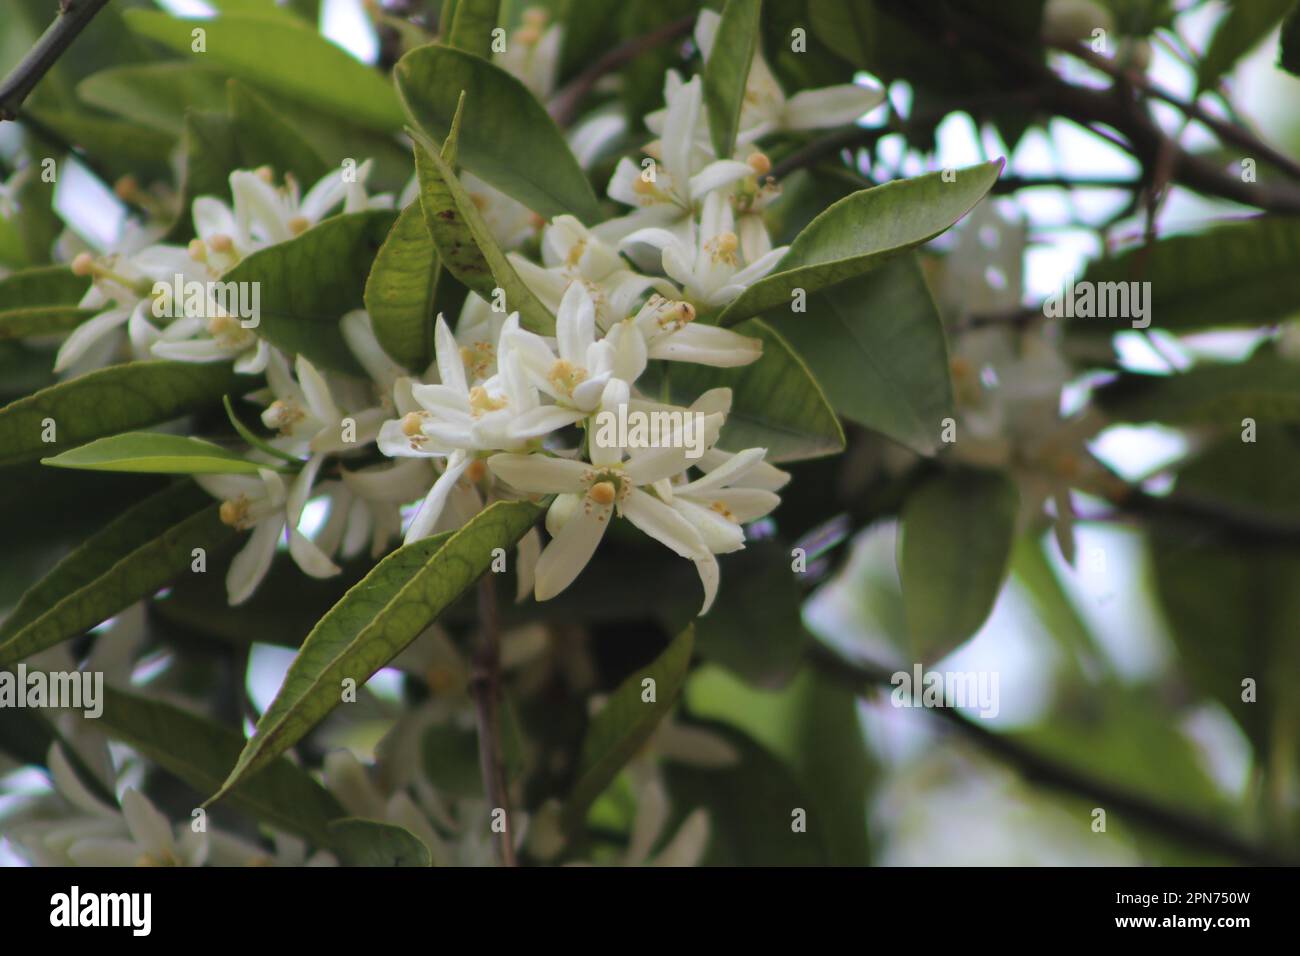 Blossom orange tree in orchard close up. Selective focus on white flower. Summer or spring time concept idea. Stock Photo